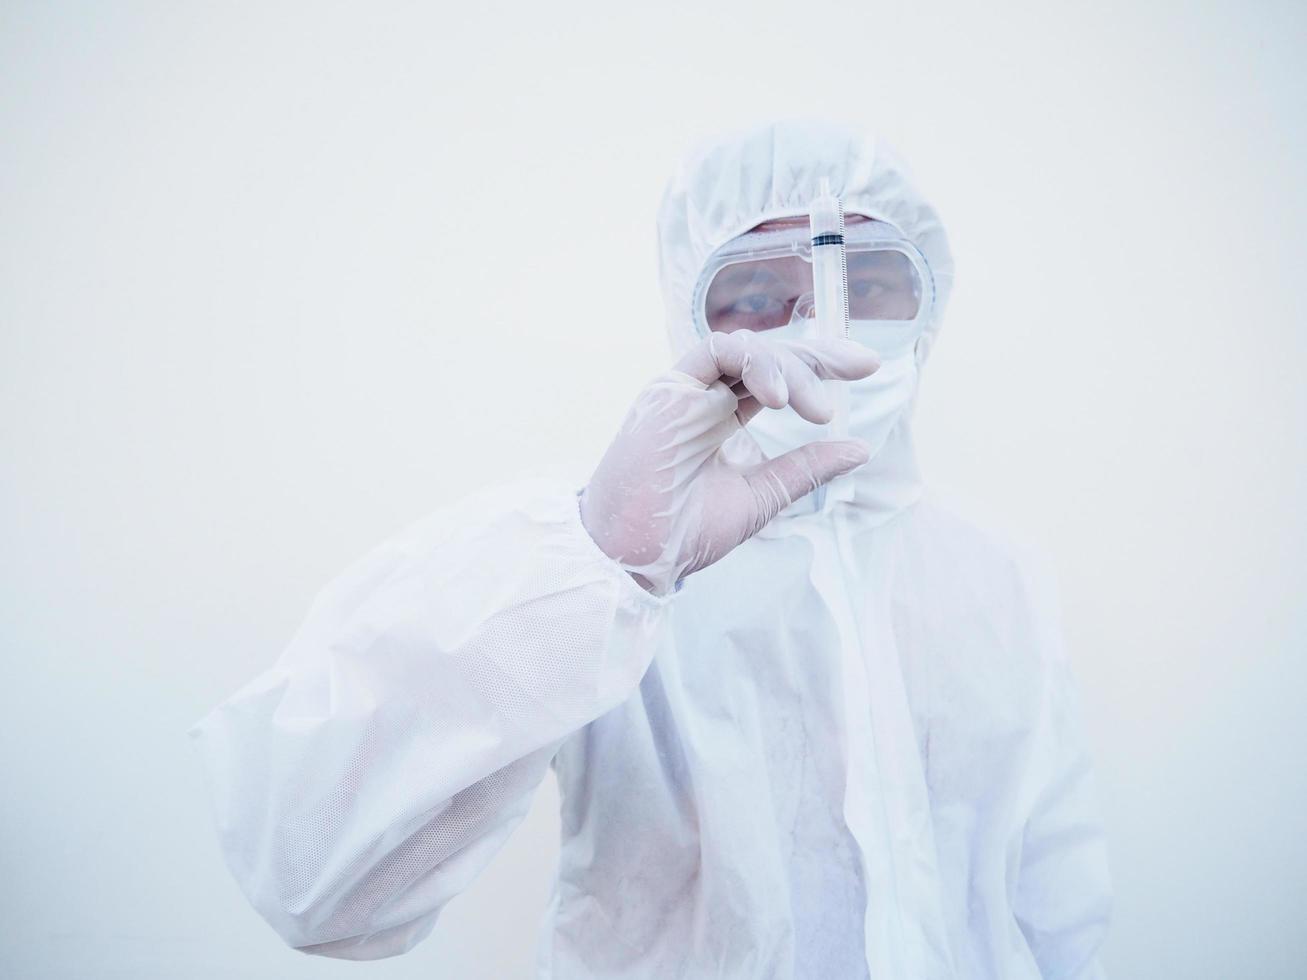 Asian doctor or scientist in PPE suite uniform holding medical injection syringe. coronavirus or COVID-19 concept isolated white background photo